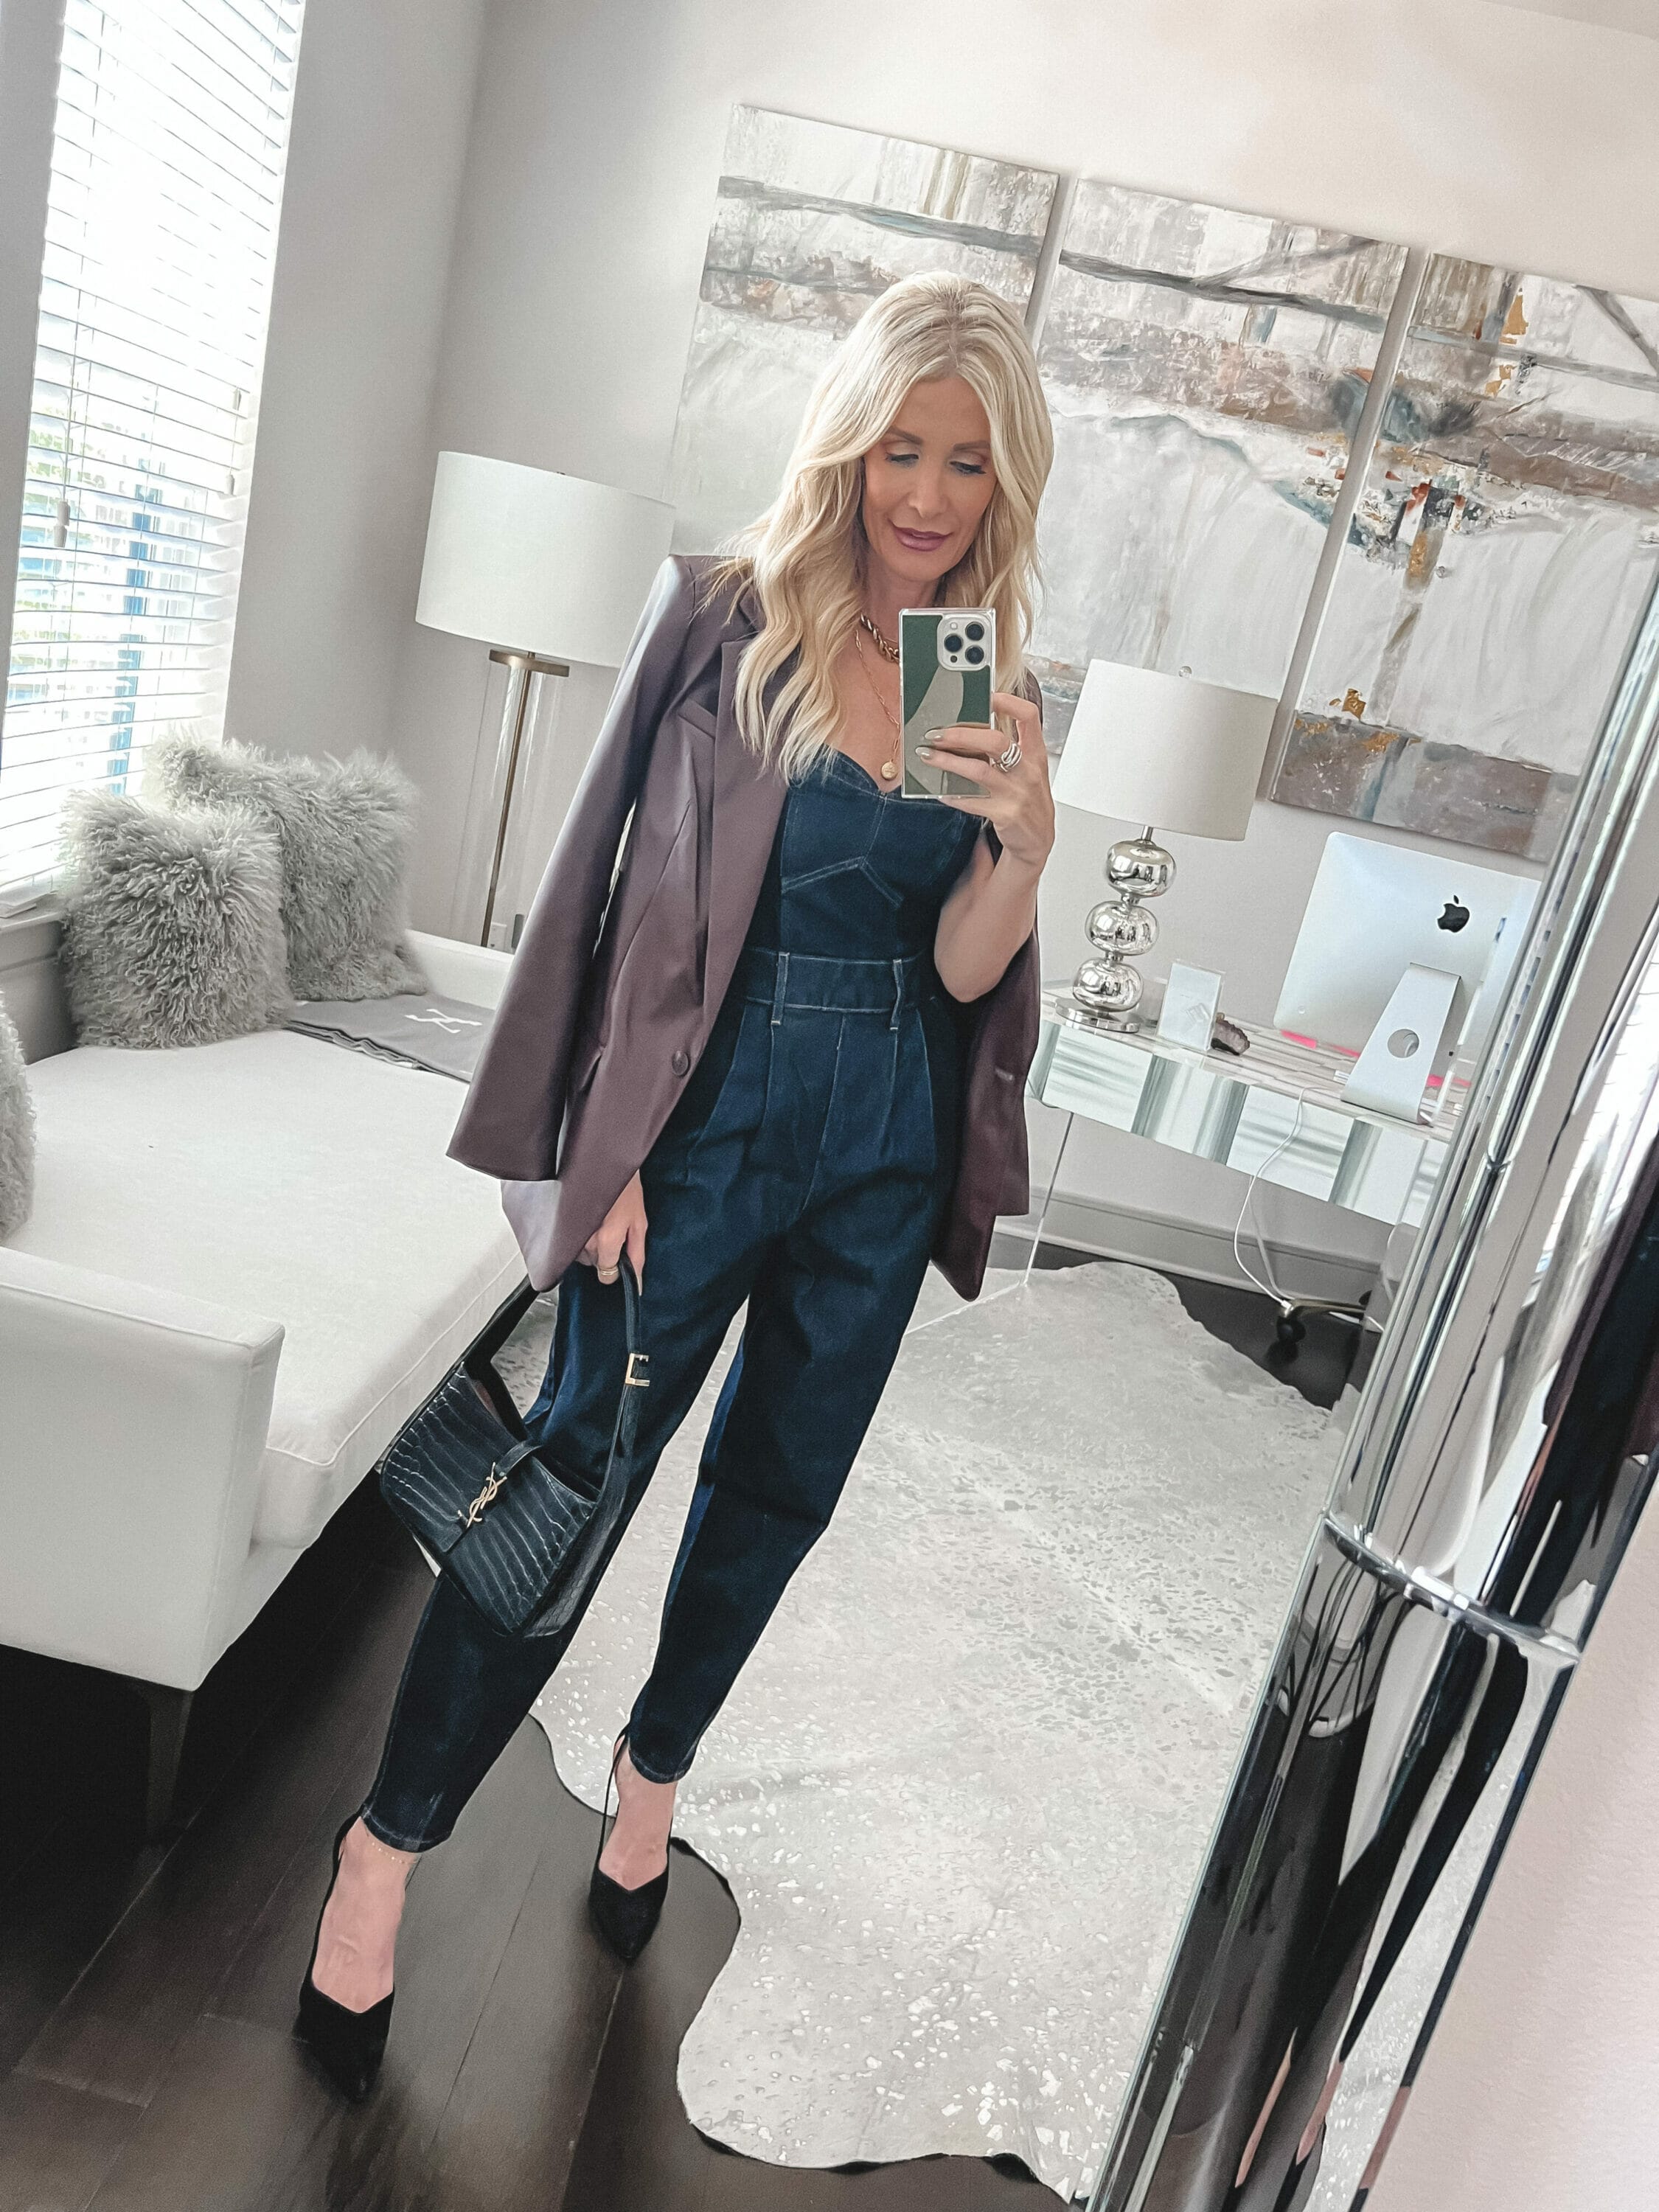 Over 40 Dallas fashion influencer wearing a denim jumpsuit as one of 7 chic looks from Express.